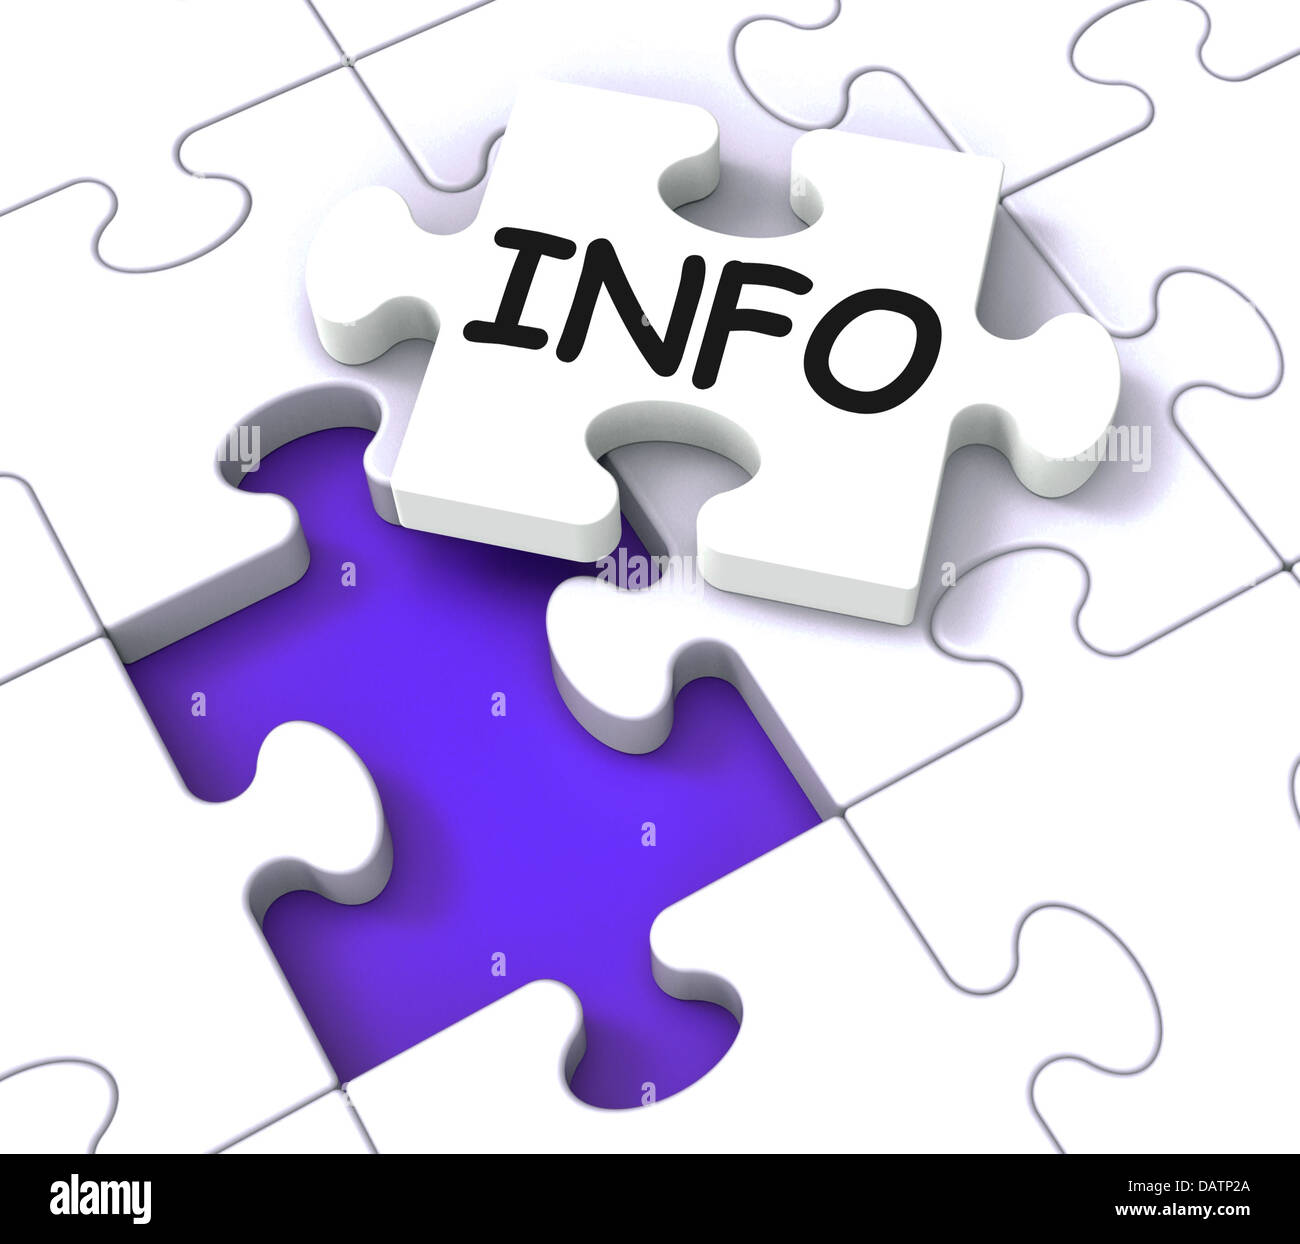 Info Puzzle Shows Information And Knowledge Stock Photo